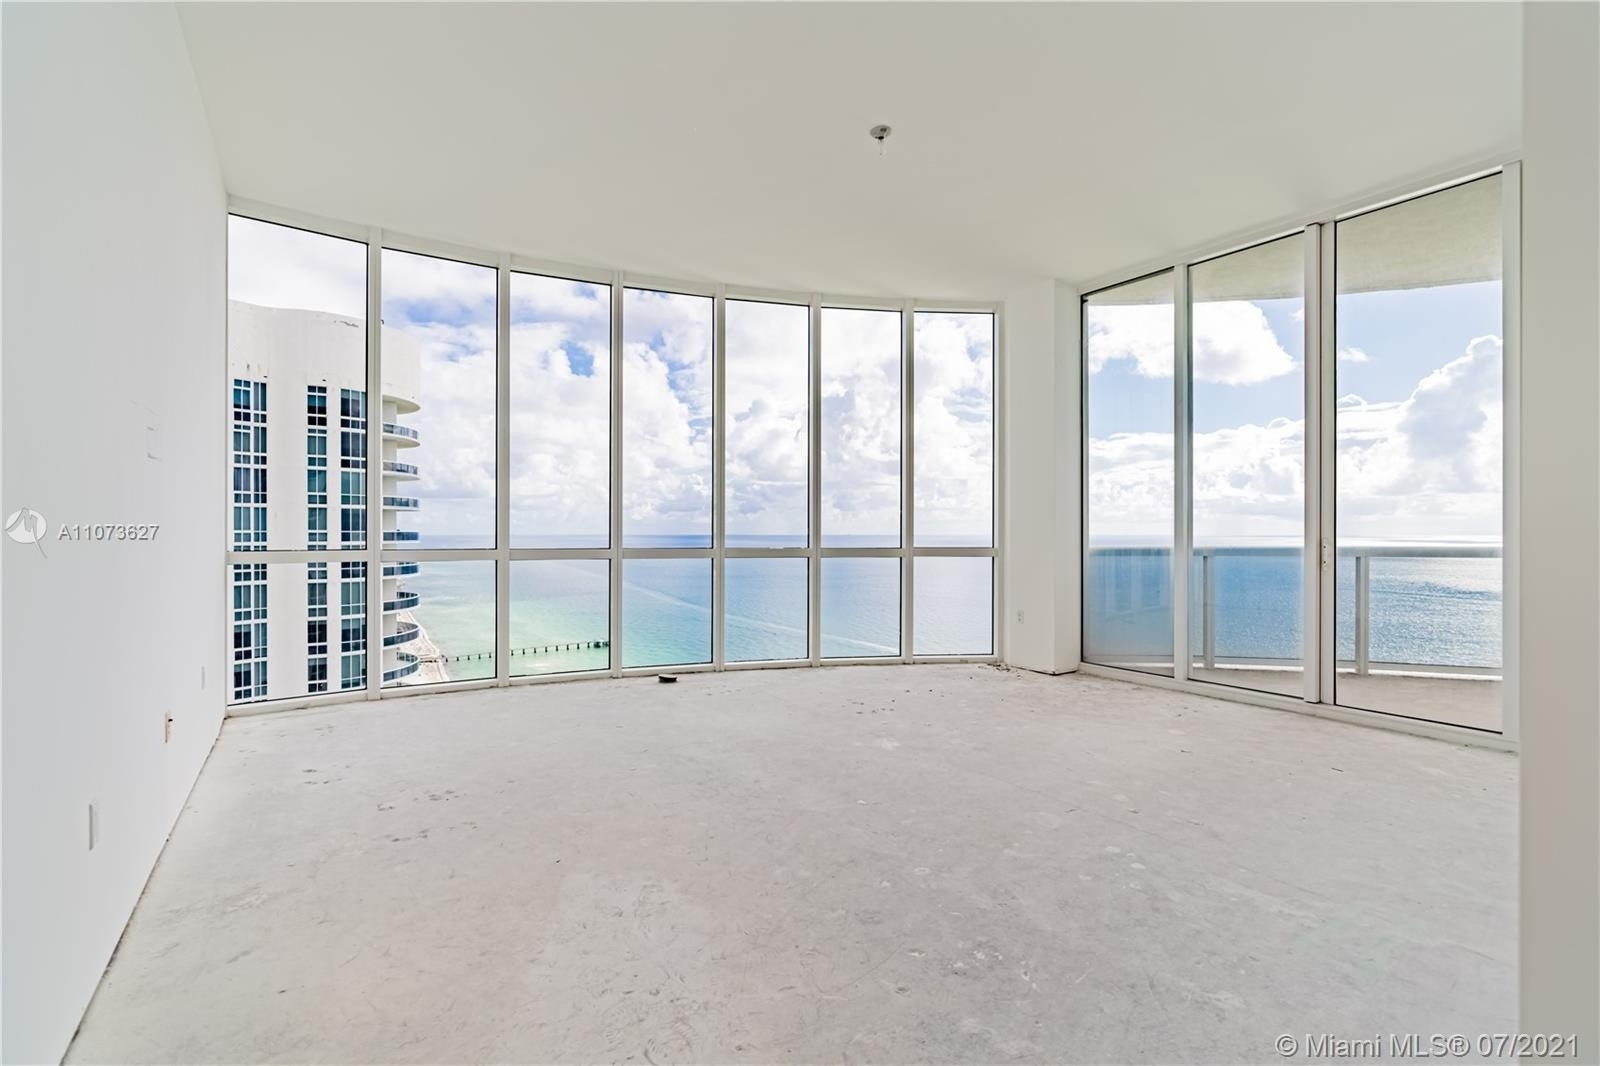 12. Condominiums for Sale at 15811 Collins Ave , 4001 Sunny Isles Beach, FL 33160